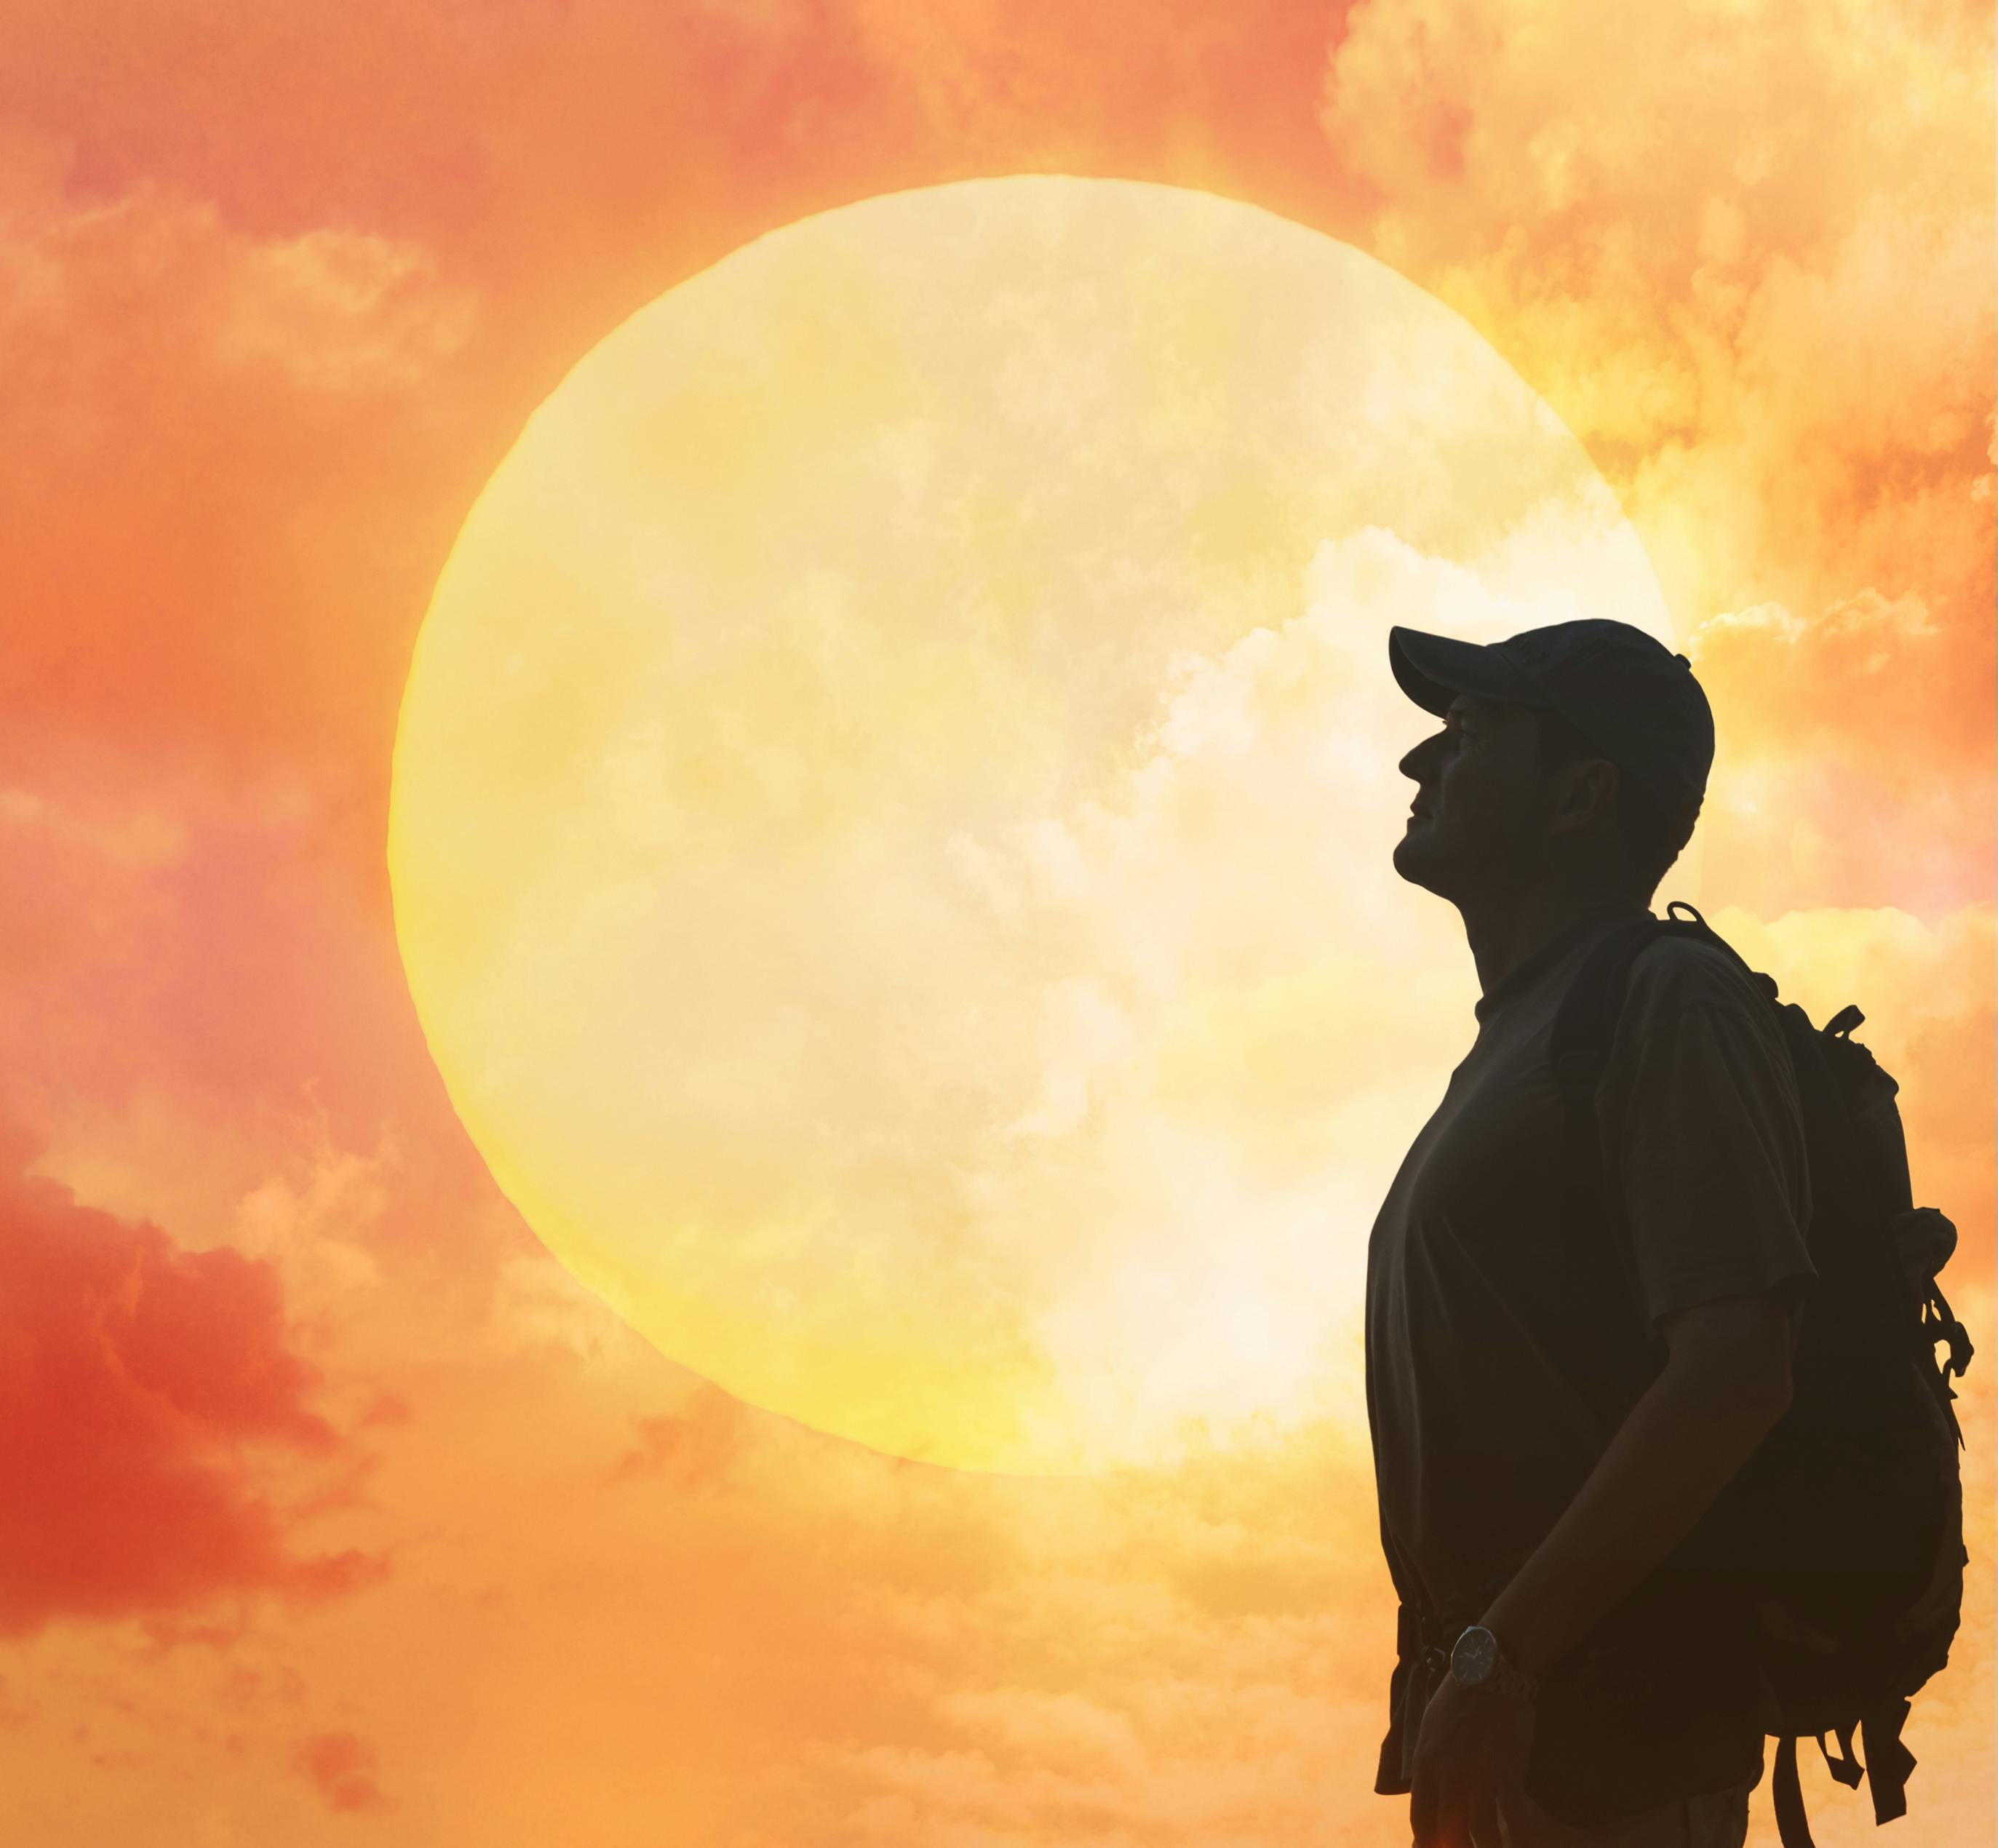 Silhouette of man with backpage in front of orange sun